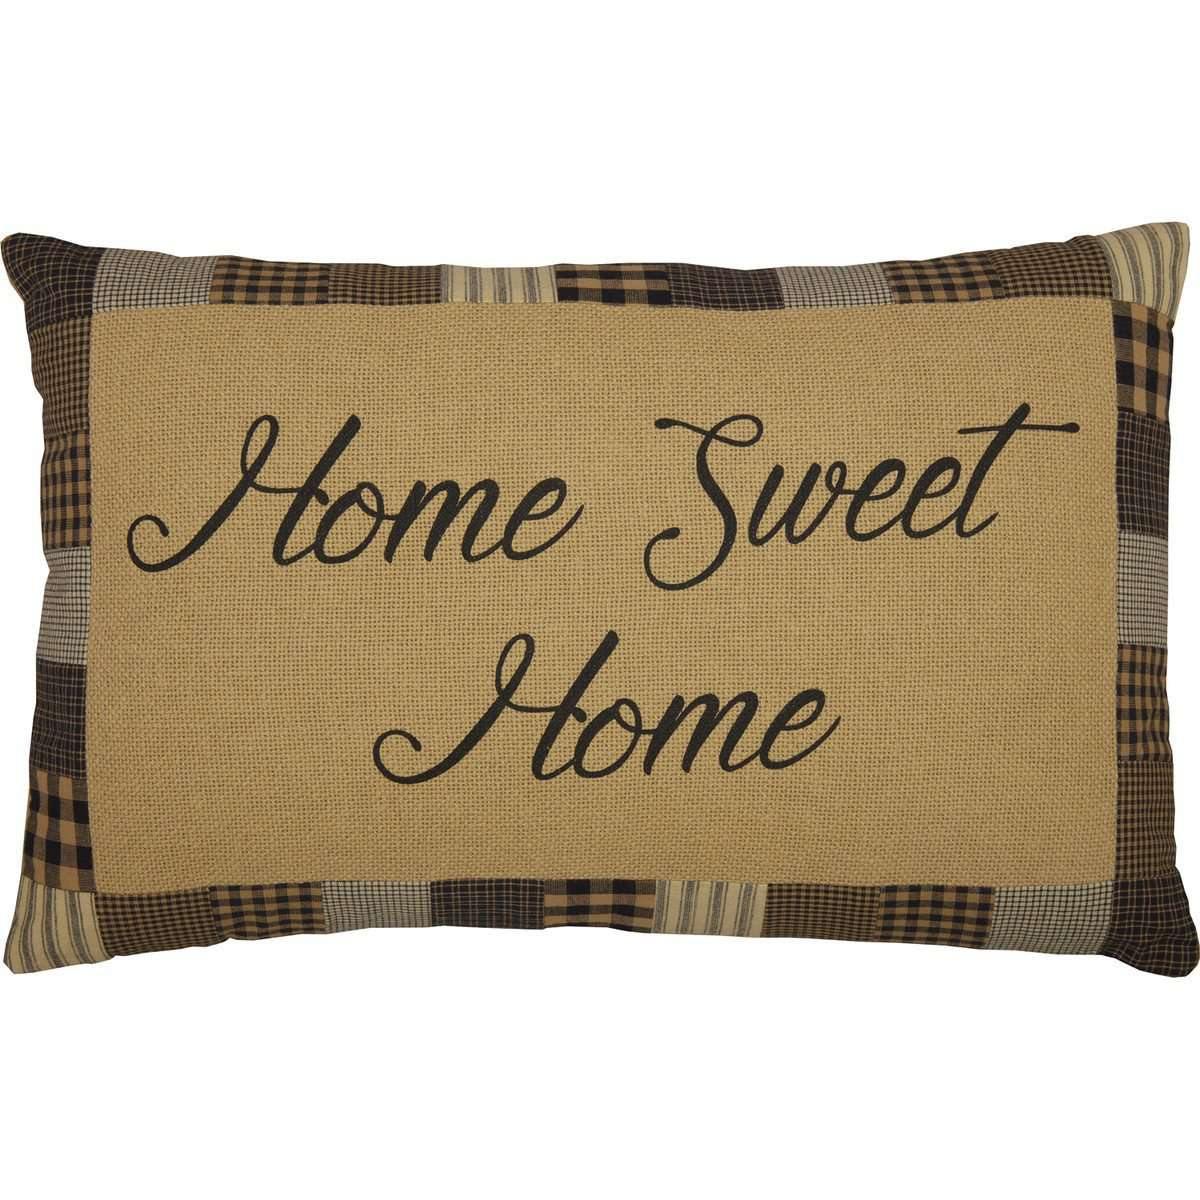 Farmhouse Star Home Sweet Home Pillow 14x22 front